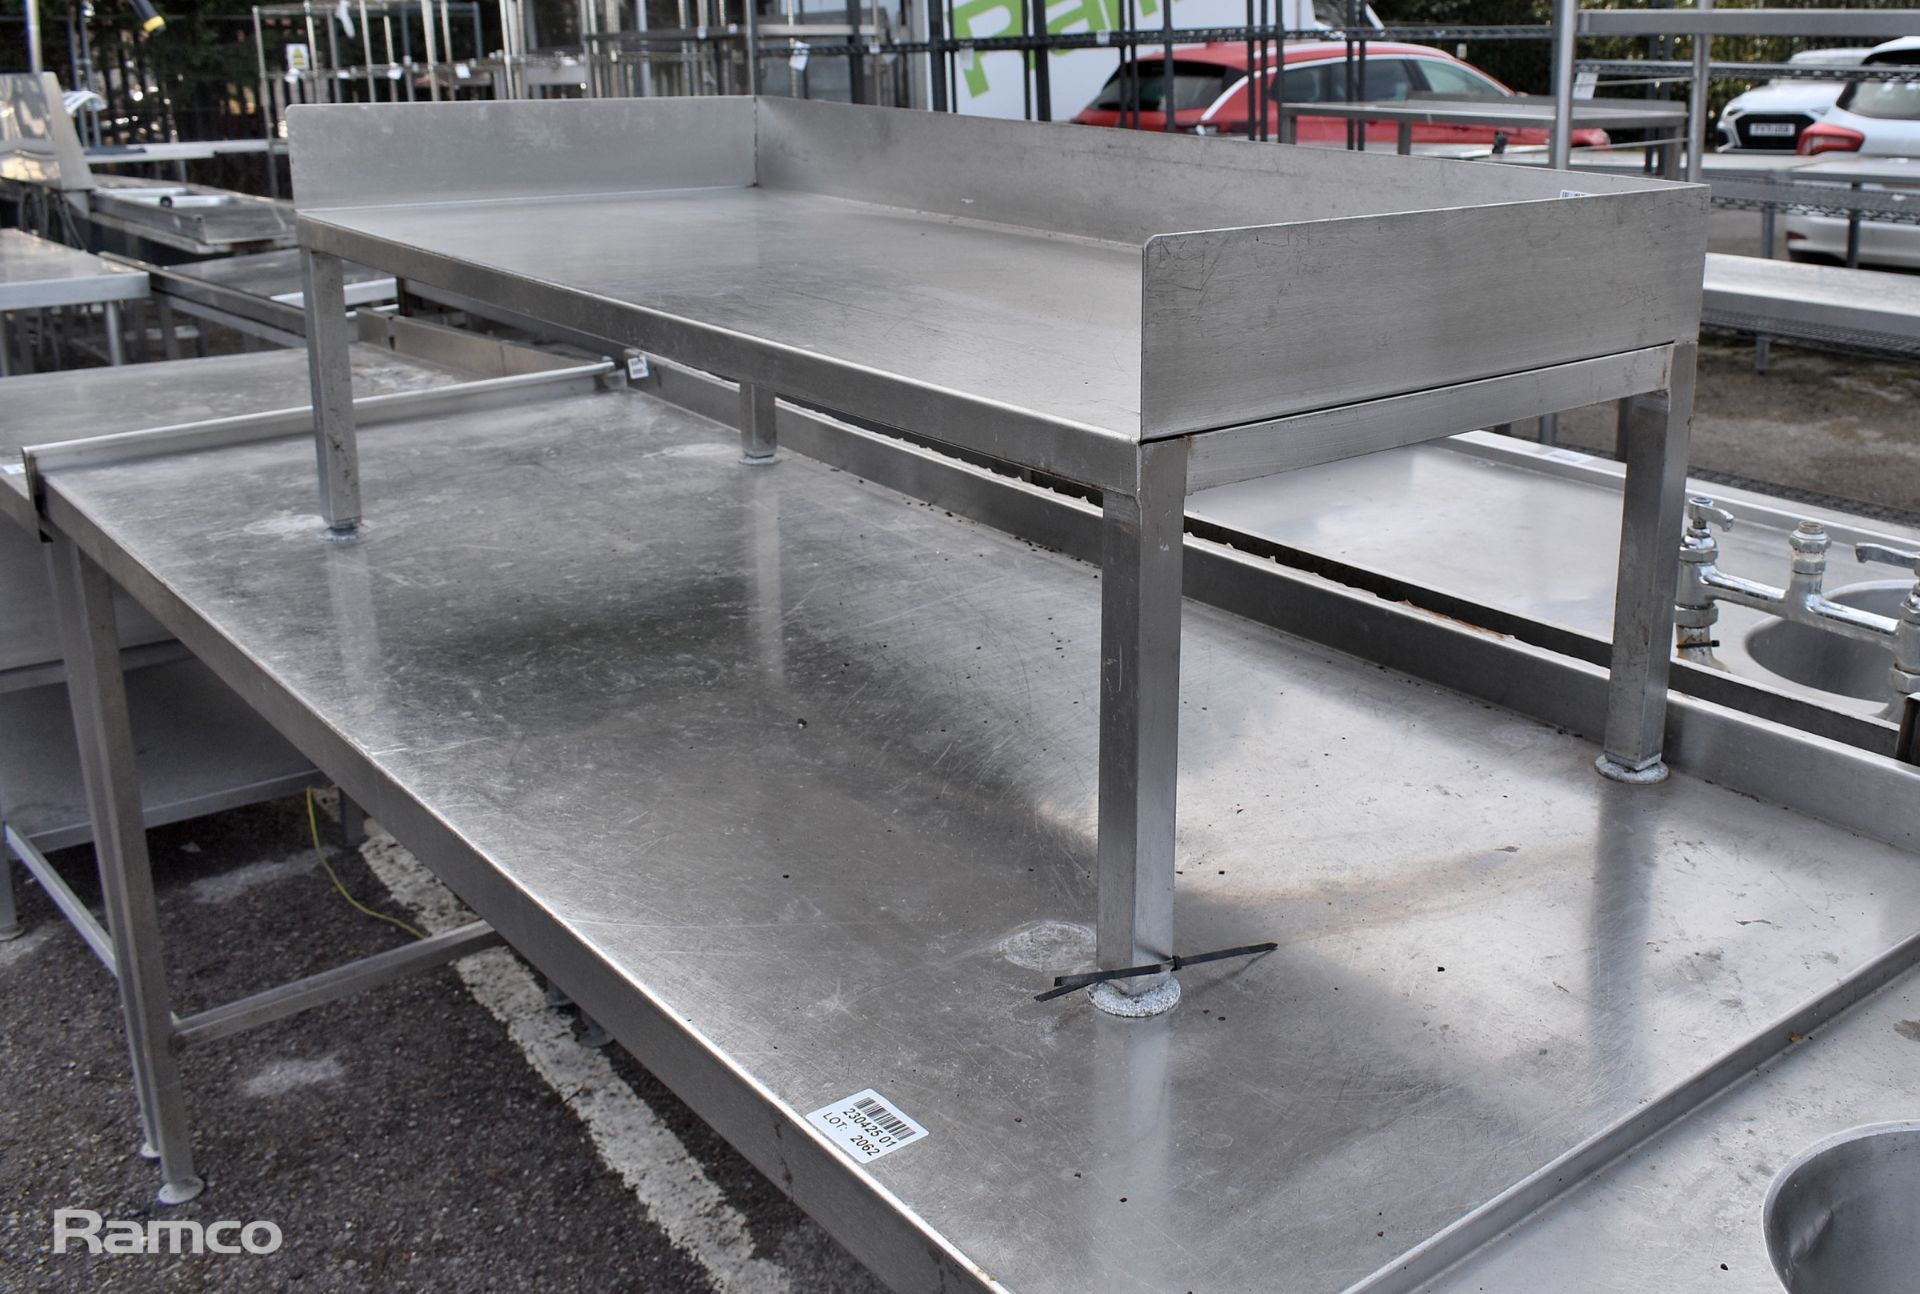 Stainless steel table with small sink bowl and upstand - dimensions: 225 x 70 x 95cm - Image 5 of 6